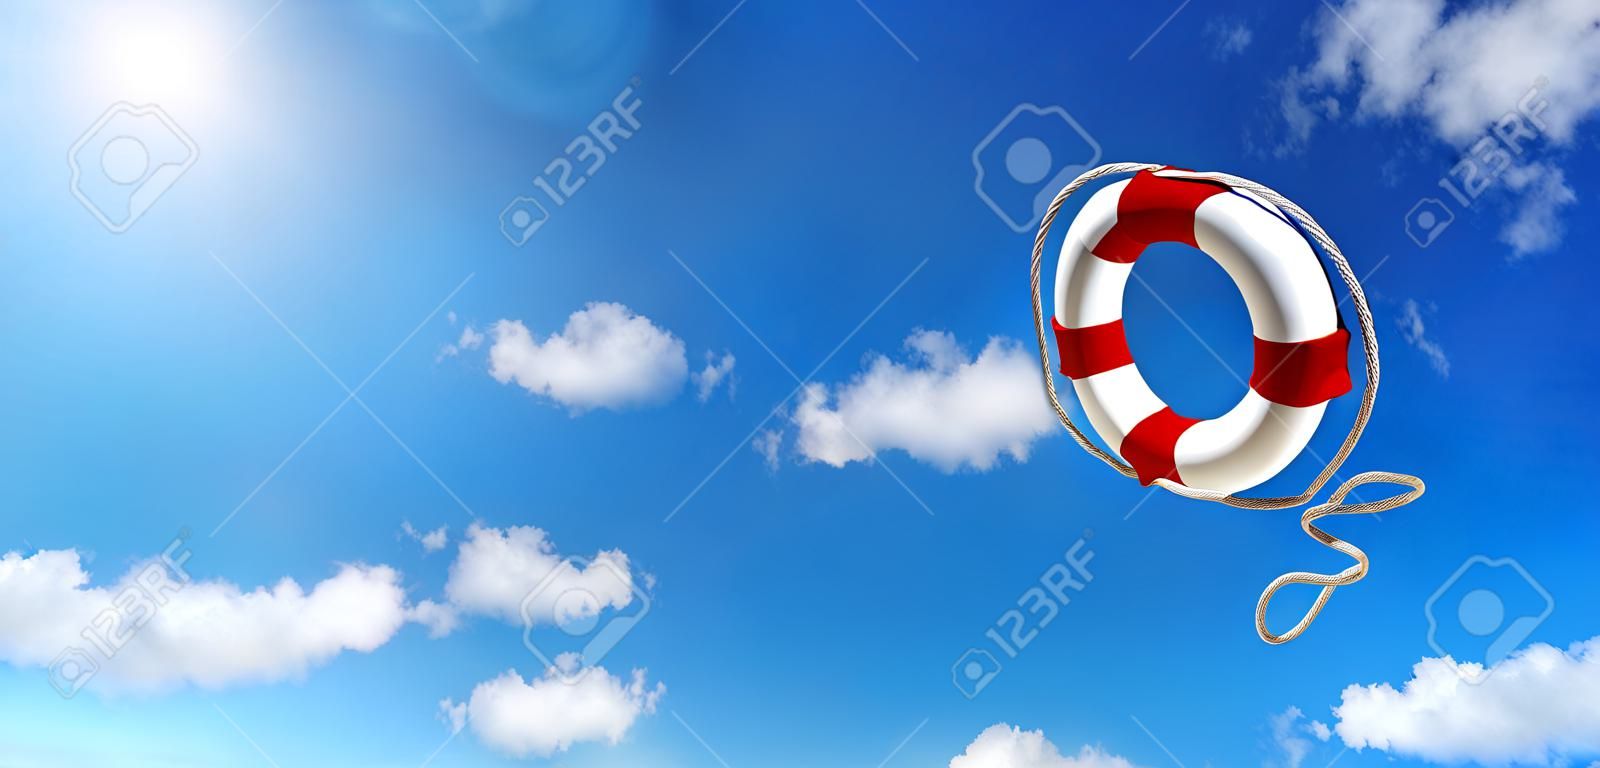 Throwing A Life Preserver In The Sky - Help Concept